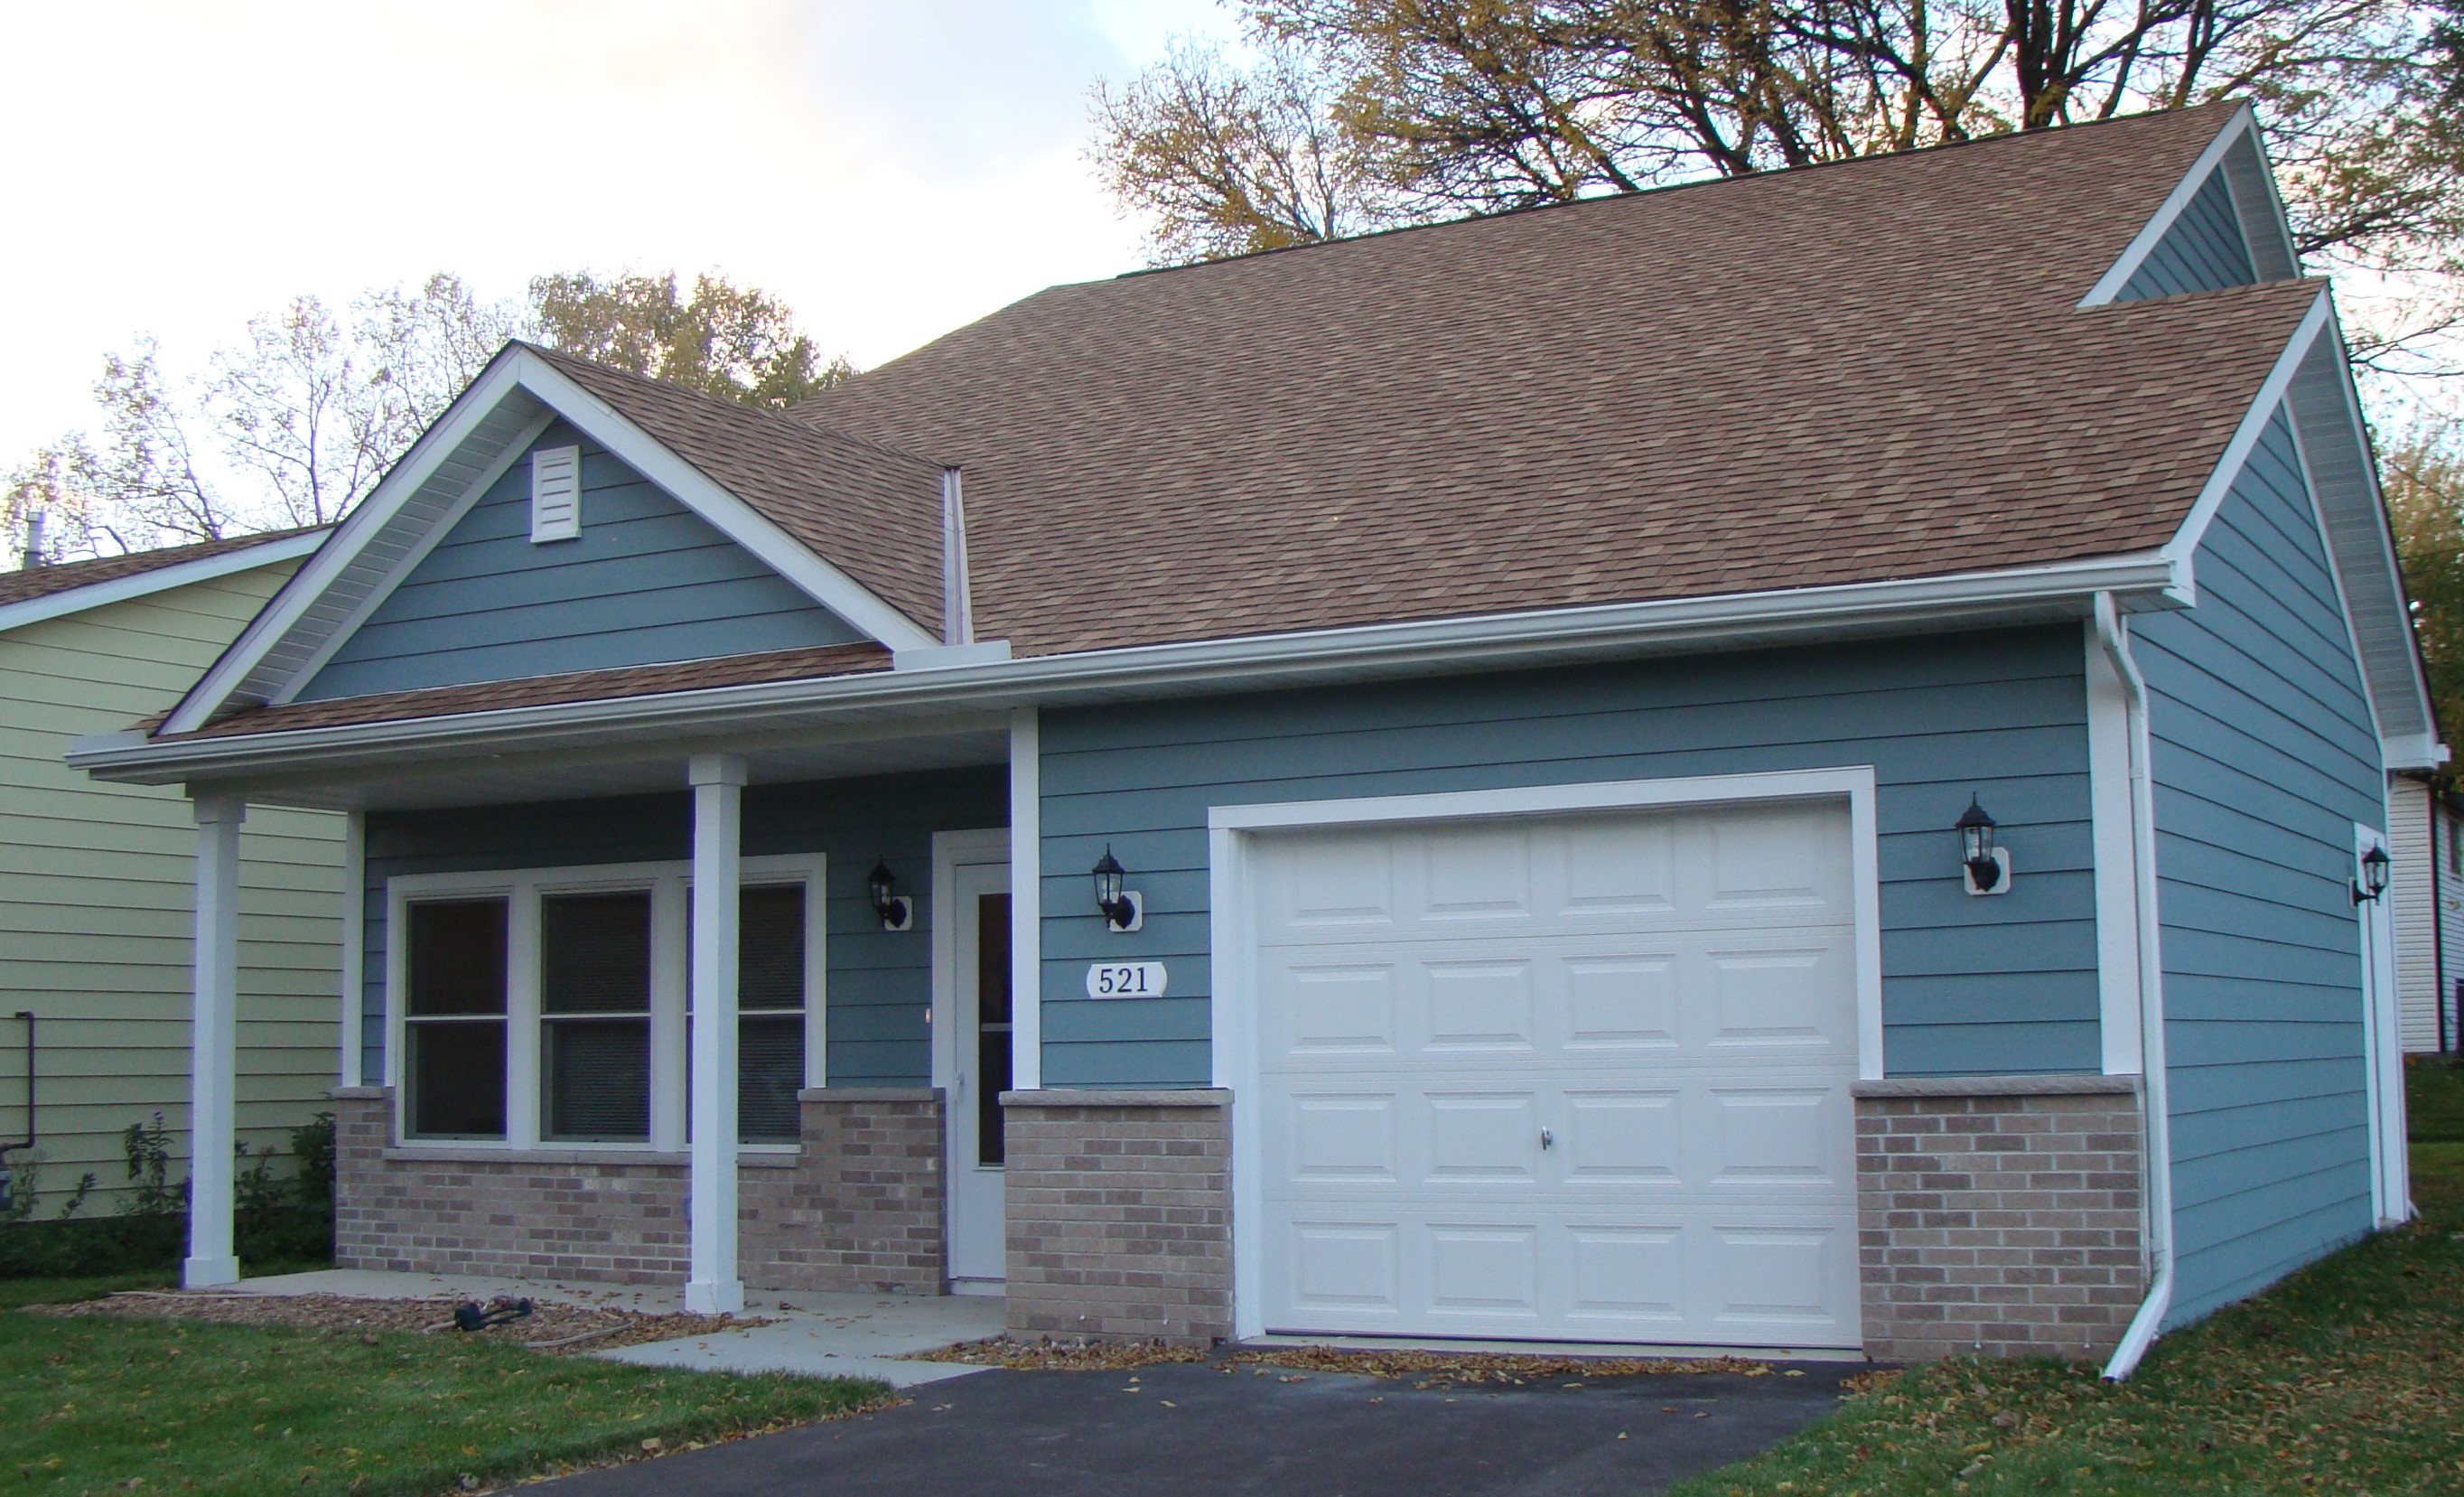 New Home Dedicated in Fridley